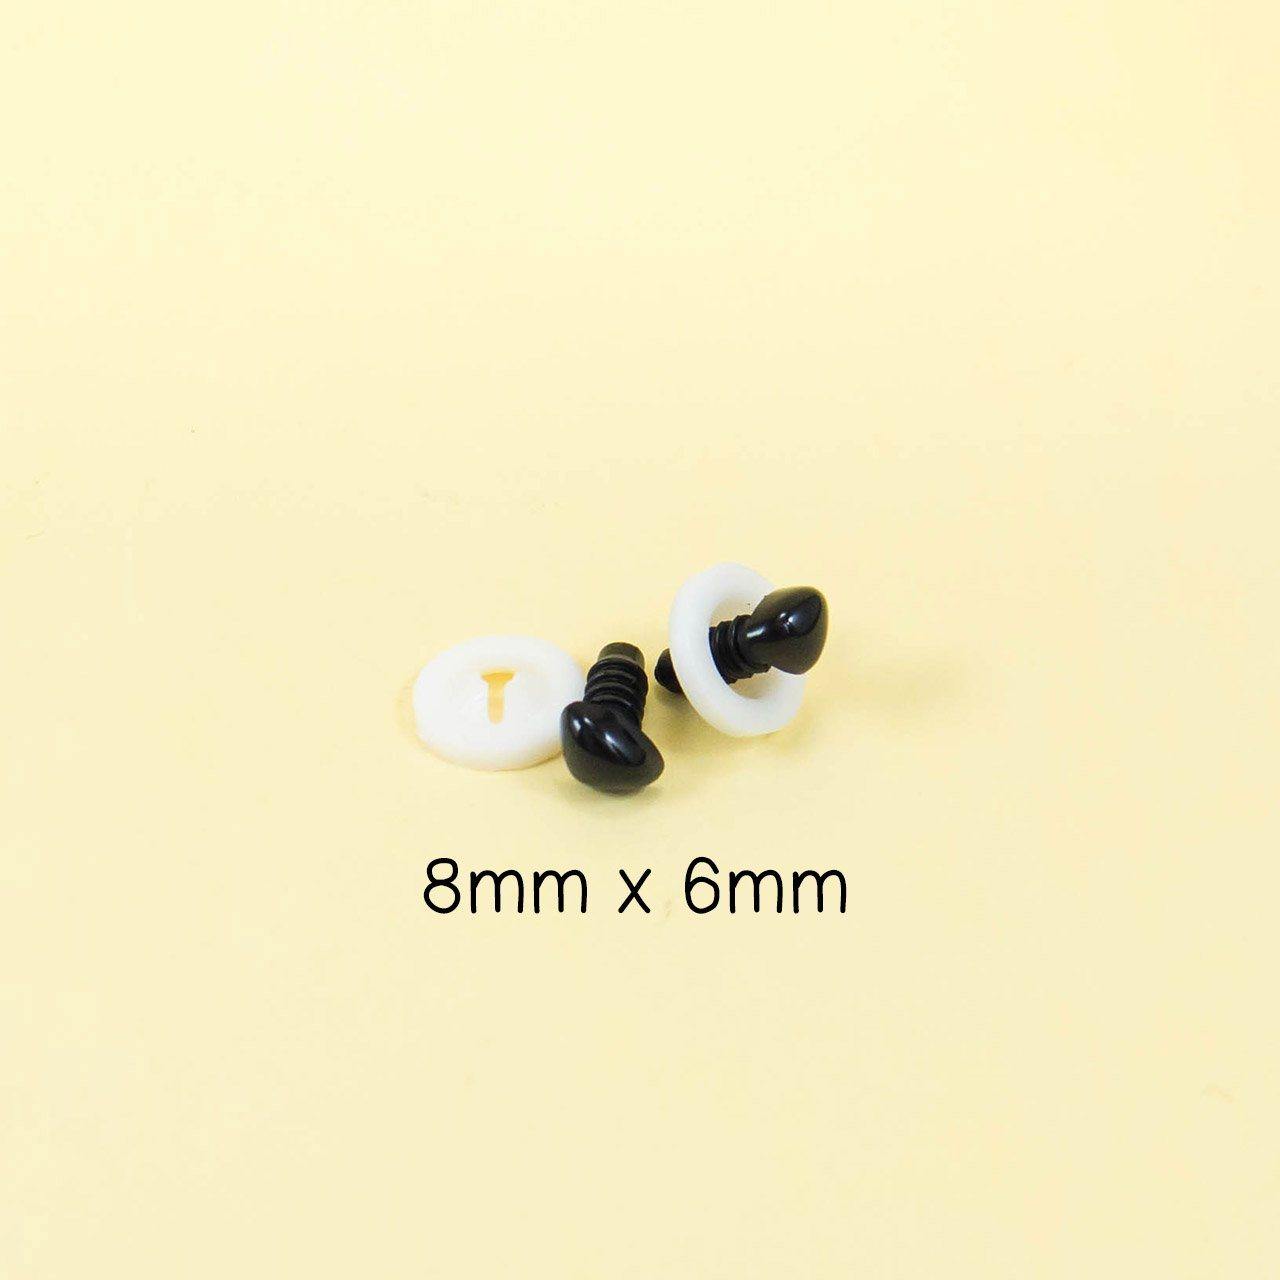 8mm x 6mm black triangle safety noses for amigurumi and handmade stuffed animals